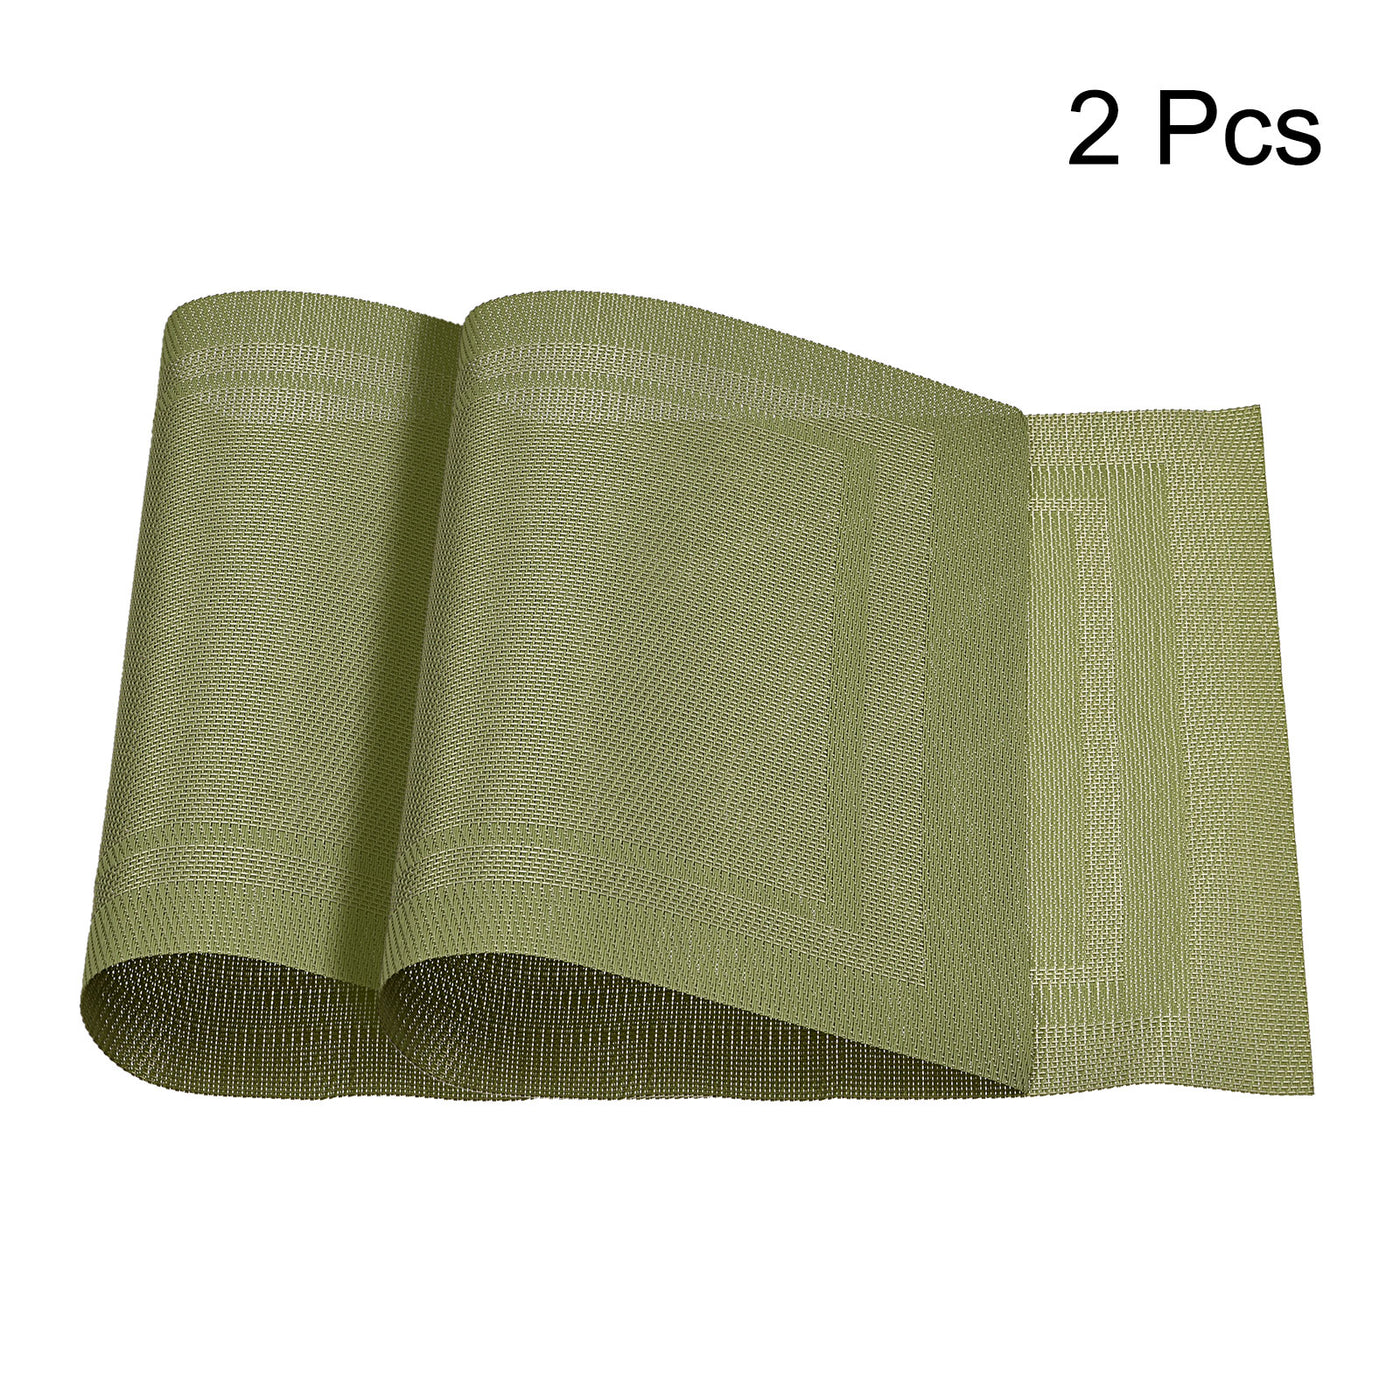 uxcell Uxcell Place Mats, 450x300mm Table Mats Set of 2 PVC Washable Woven Placemat Green